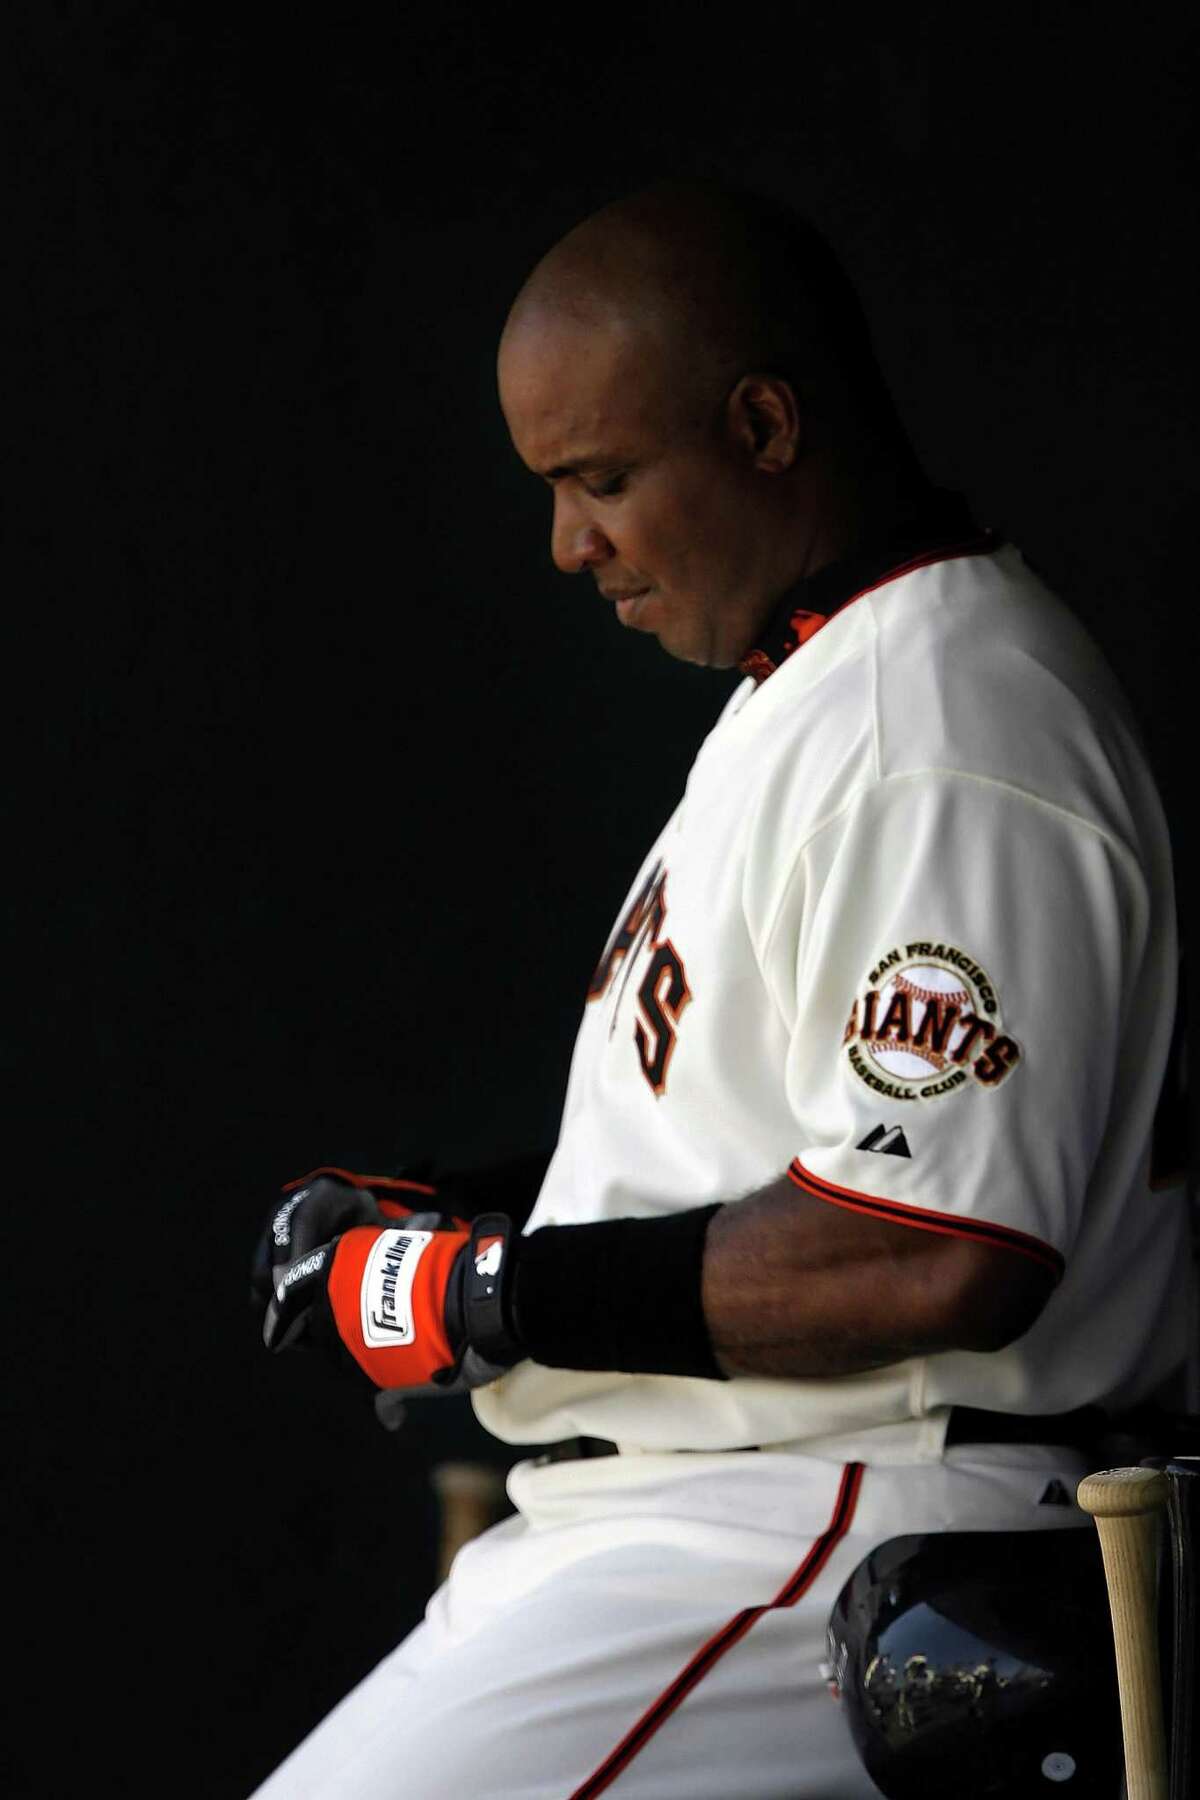 Time is ticking on Barry Bonds' Hall of Fame candidacy